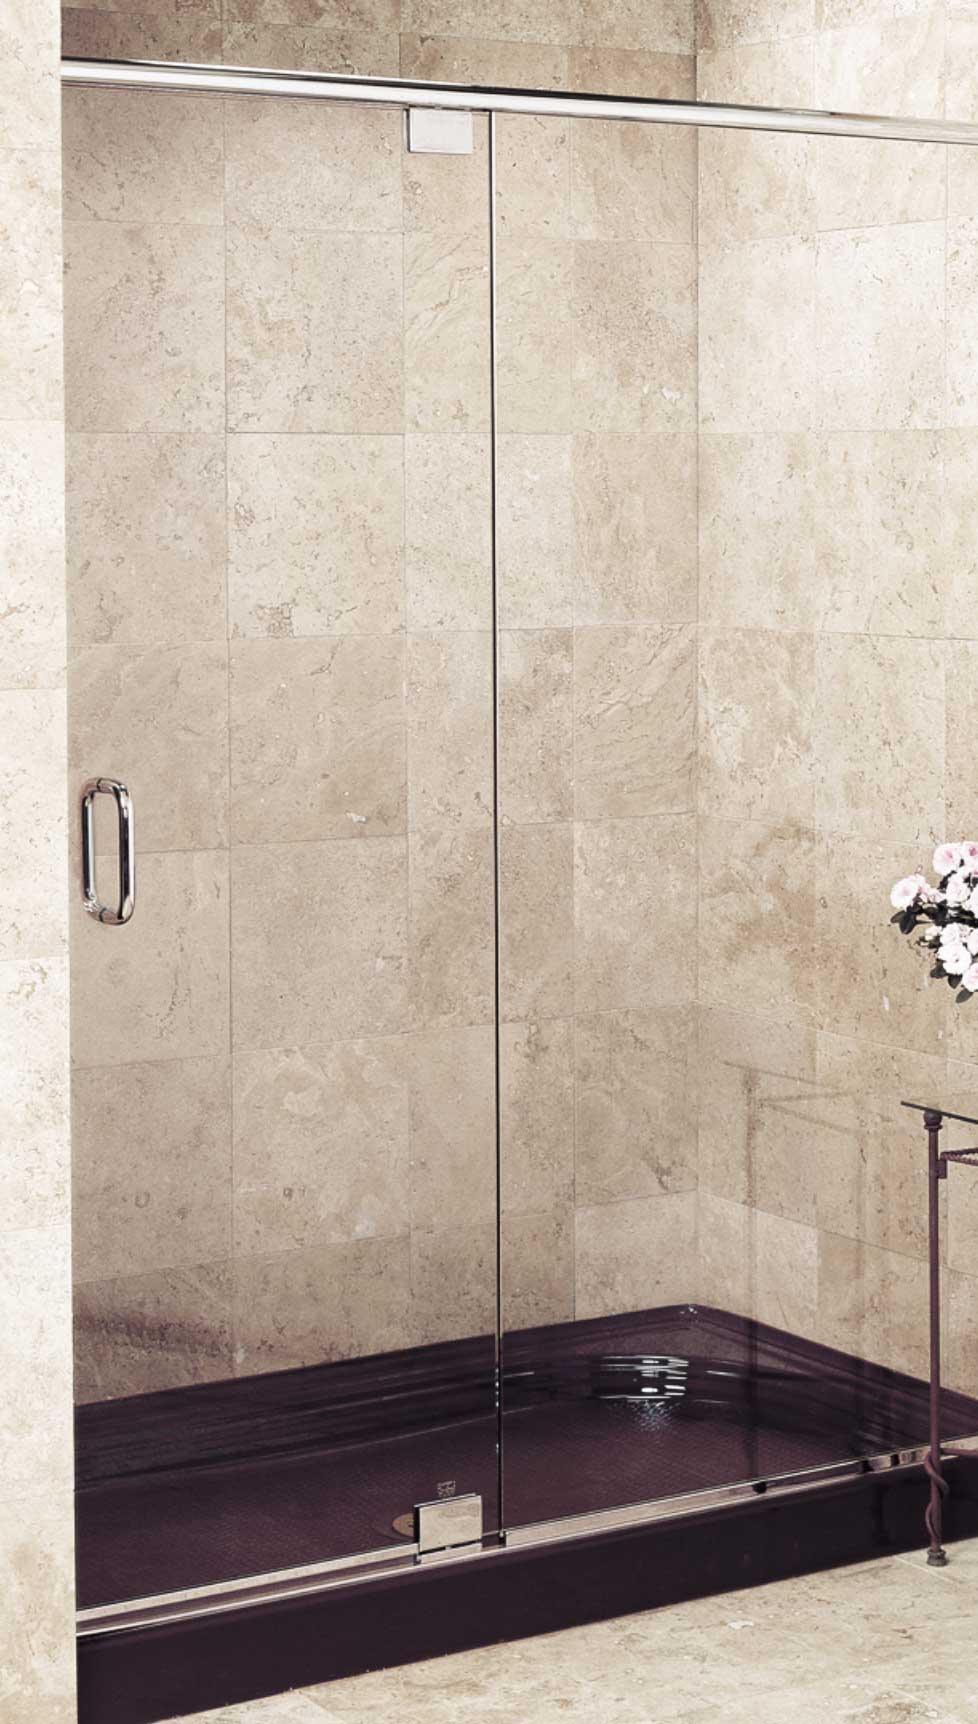 Frameless shower enclosure with a tubular pull handle and a pivot hinged door. Sand-colored tile and a purple basin.